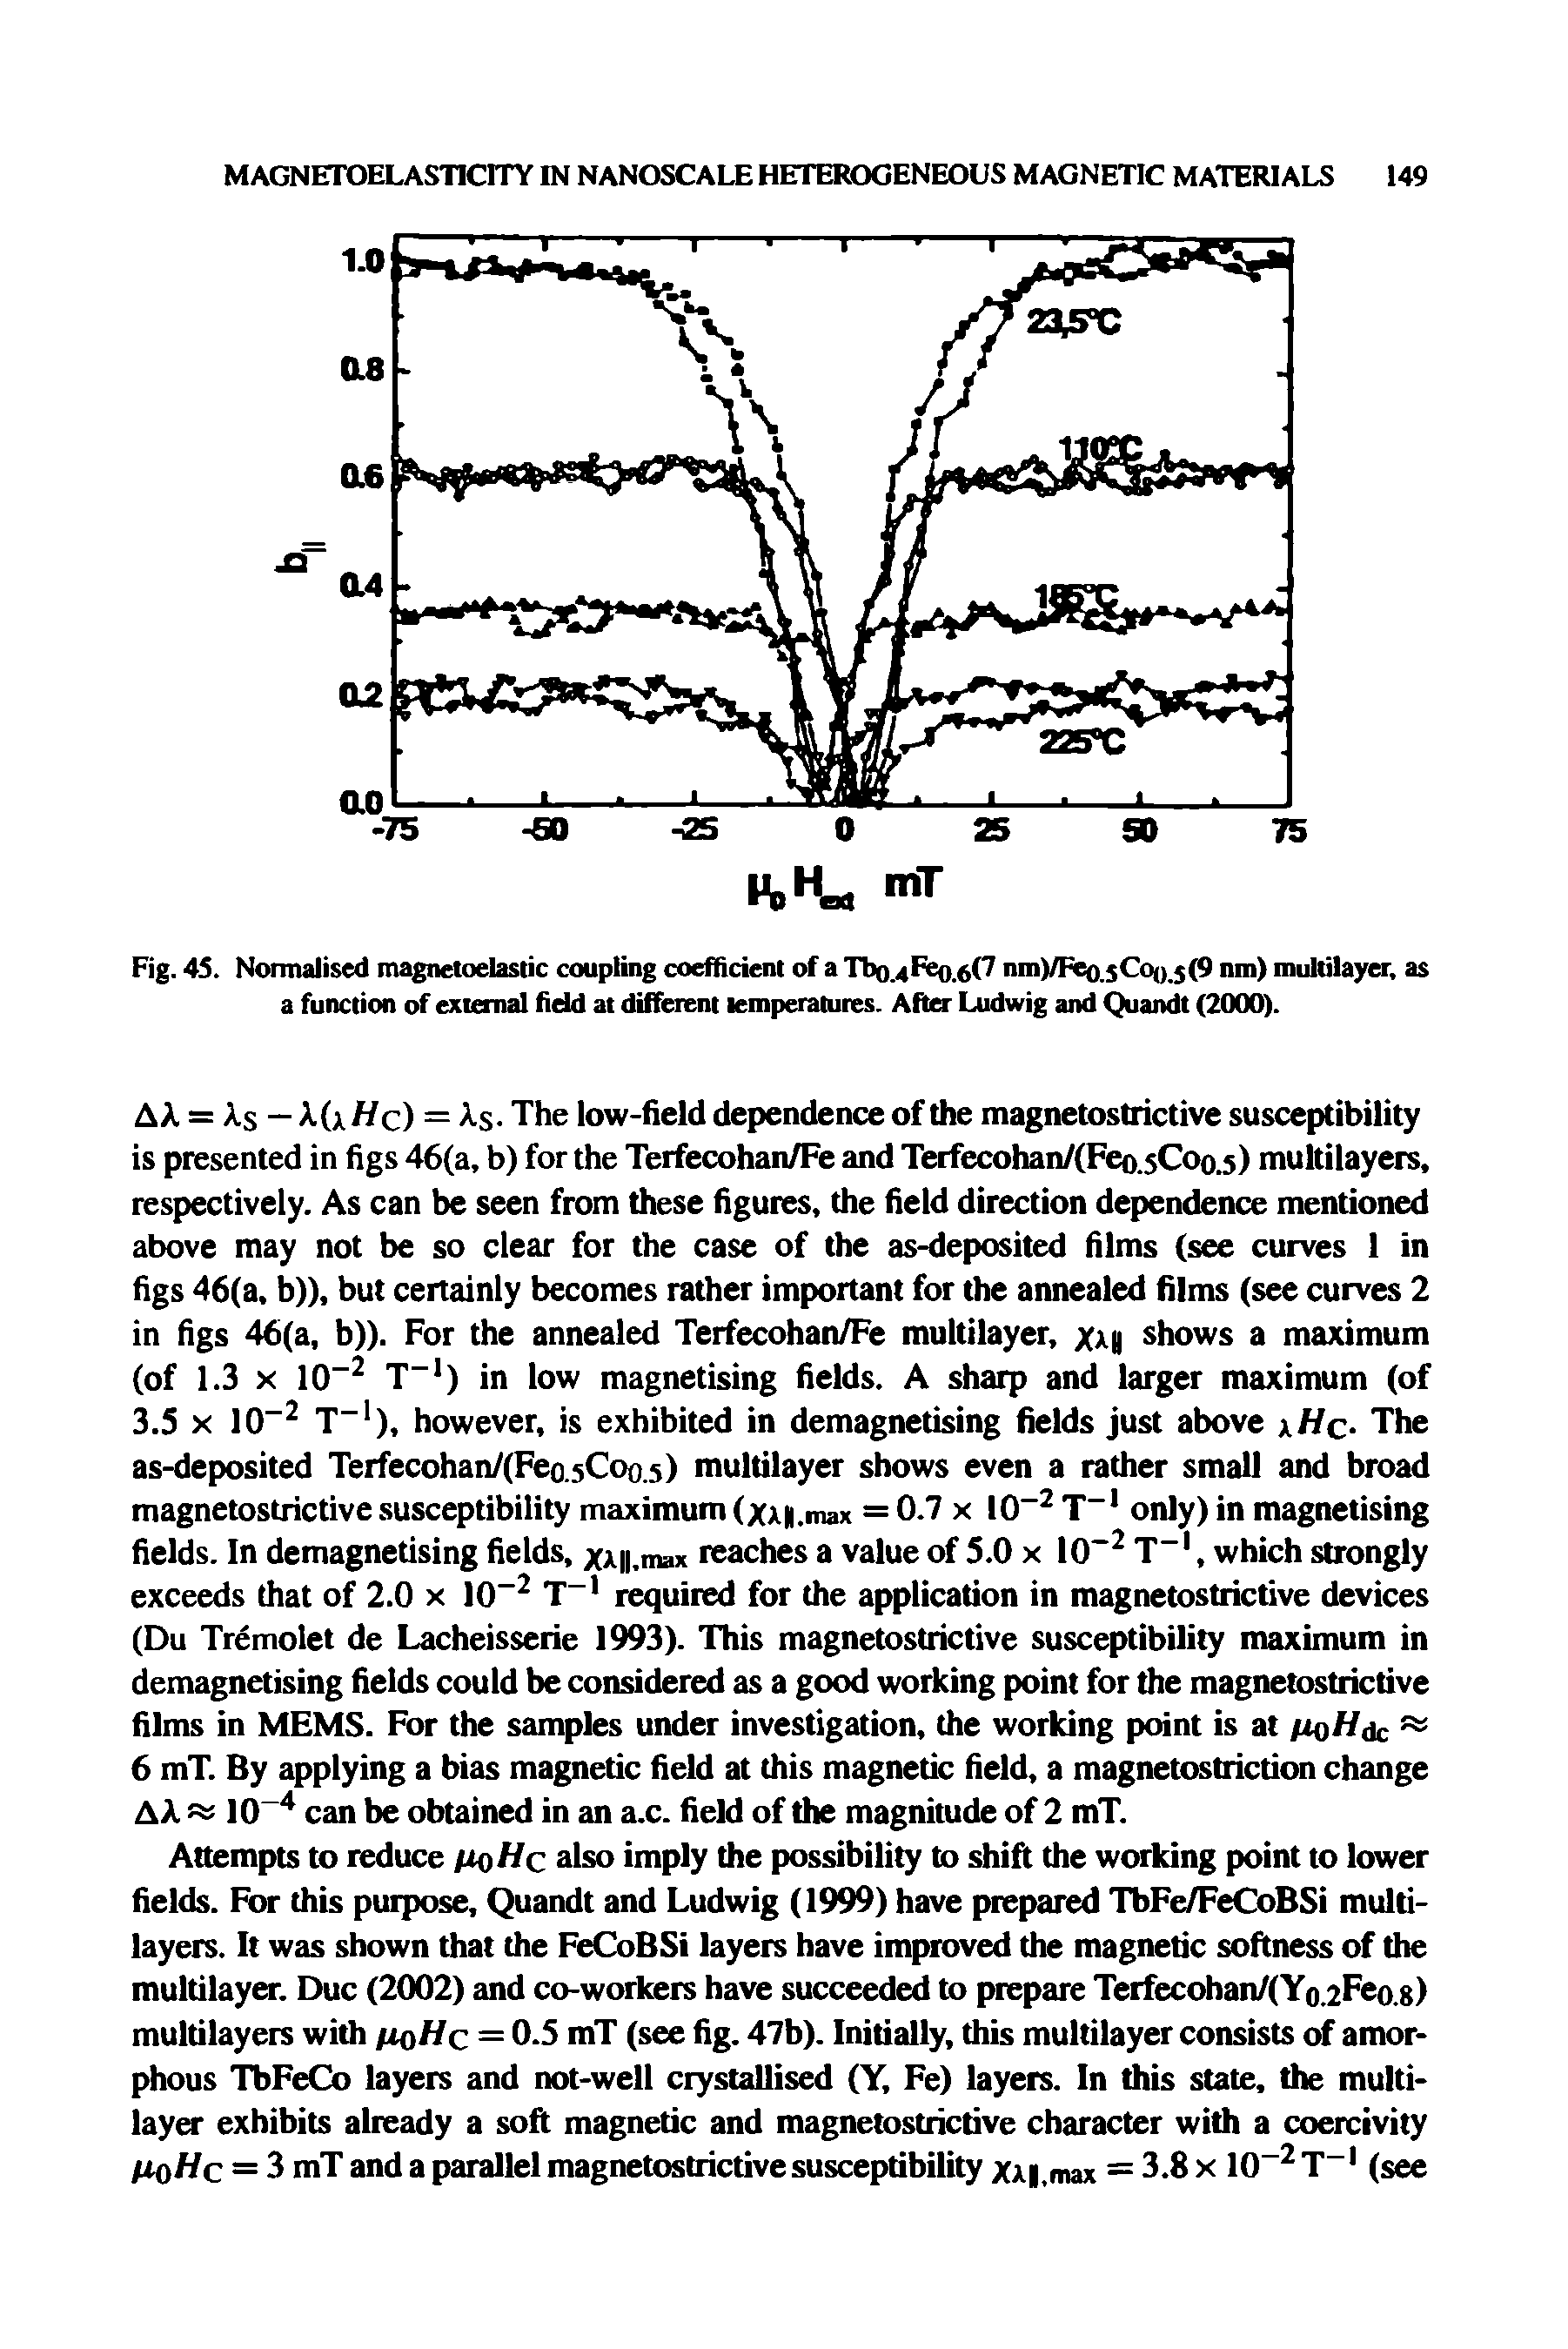 Fig. 45. Normalised magnetoelastic coupling coefficient of a Tbo.4Feo.6f7 nm)/Feo.sCoo.5(9 nm) multilayer, as a function of external field at different temperatures. After Ludwig and Quandt (2000).